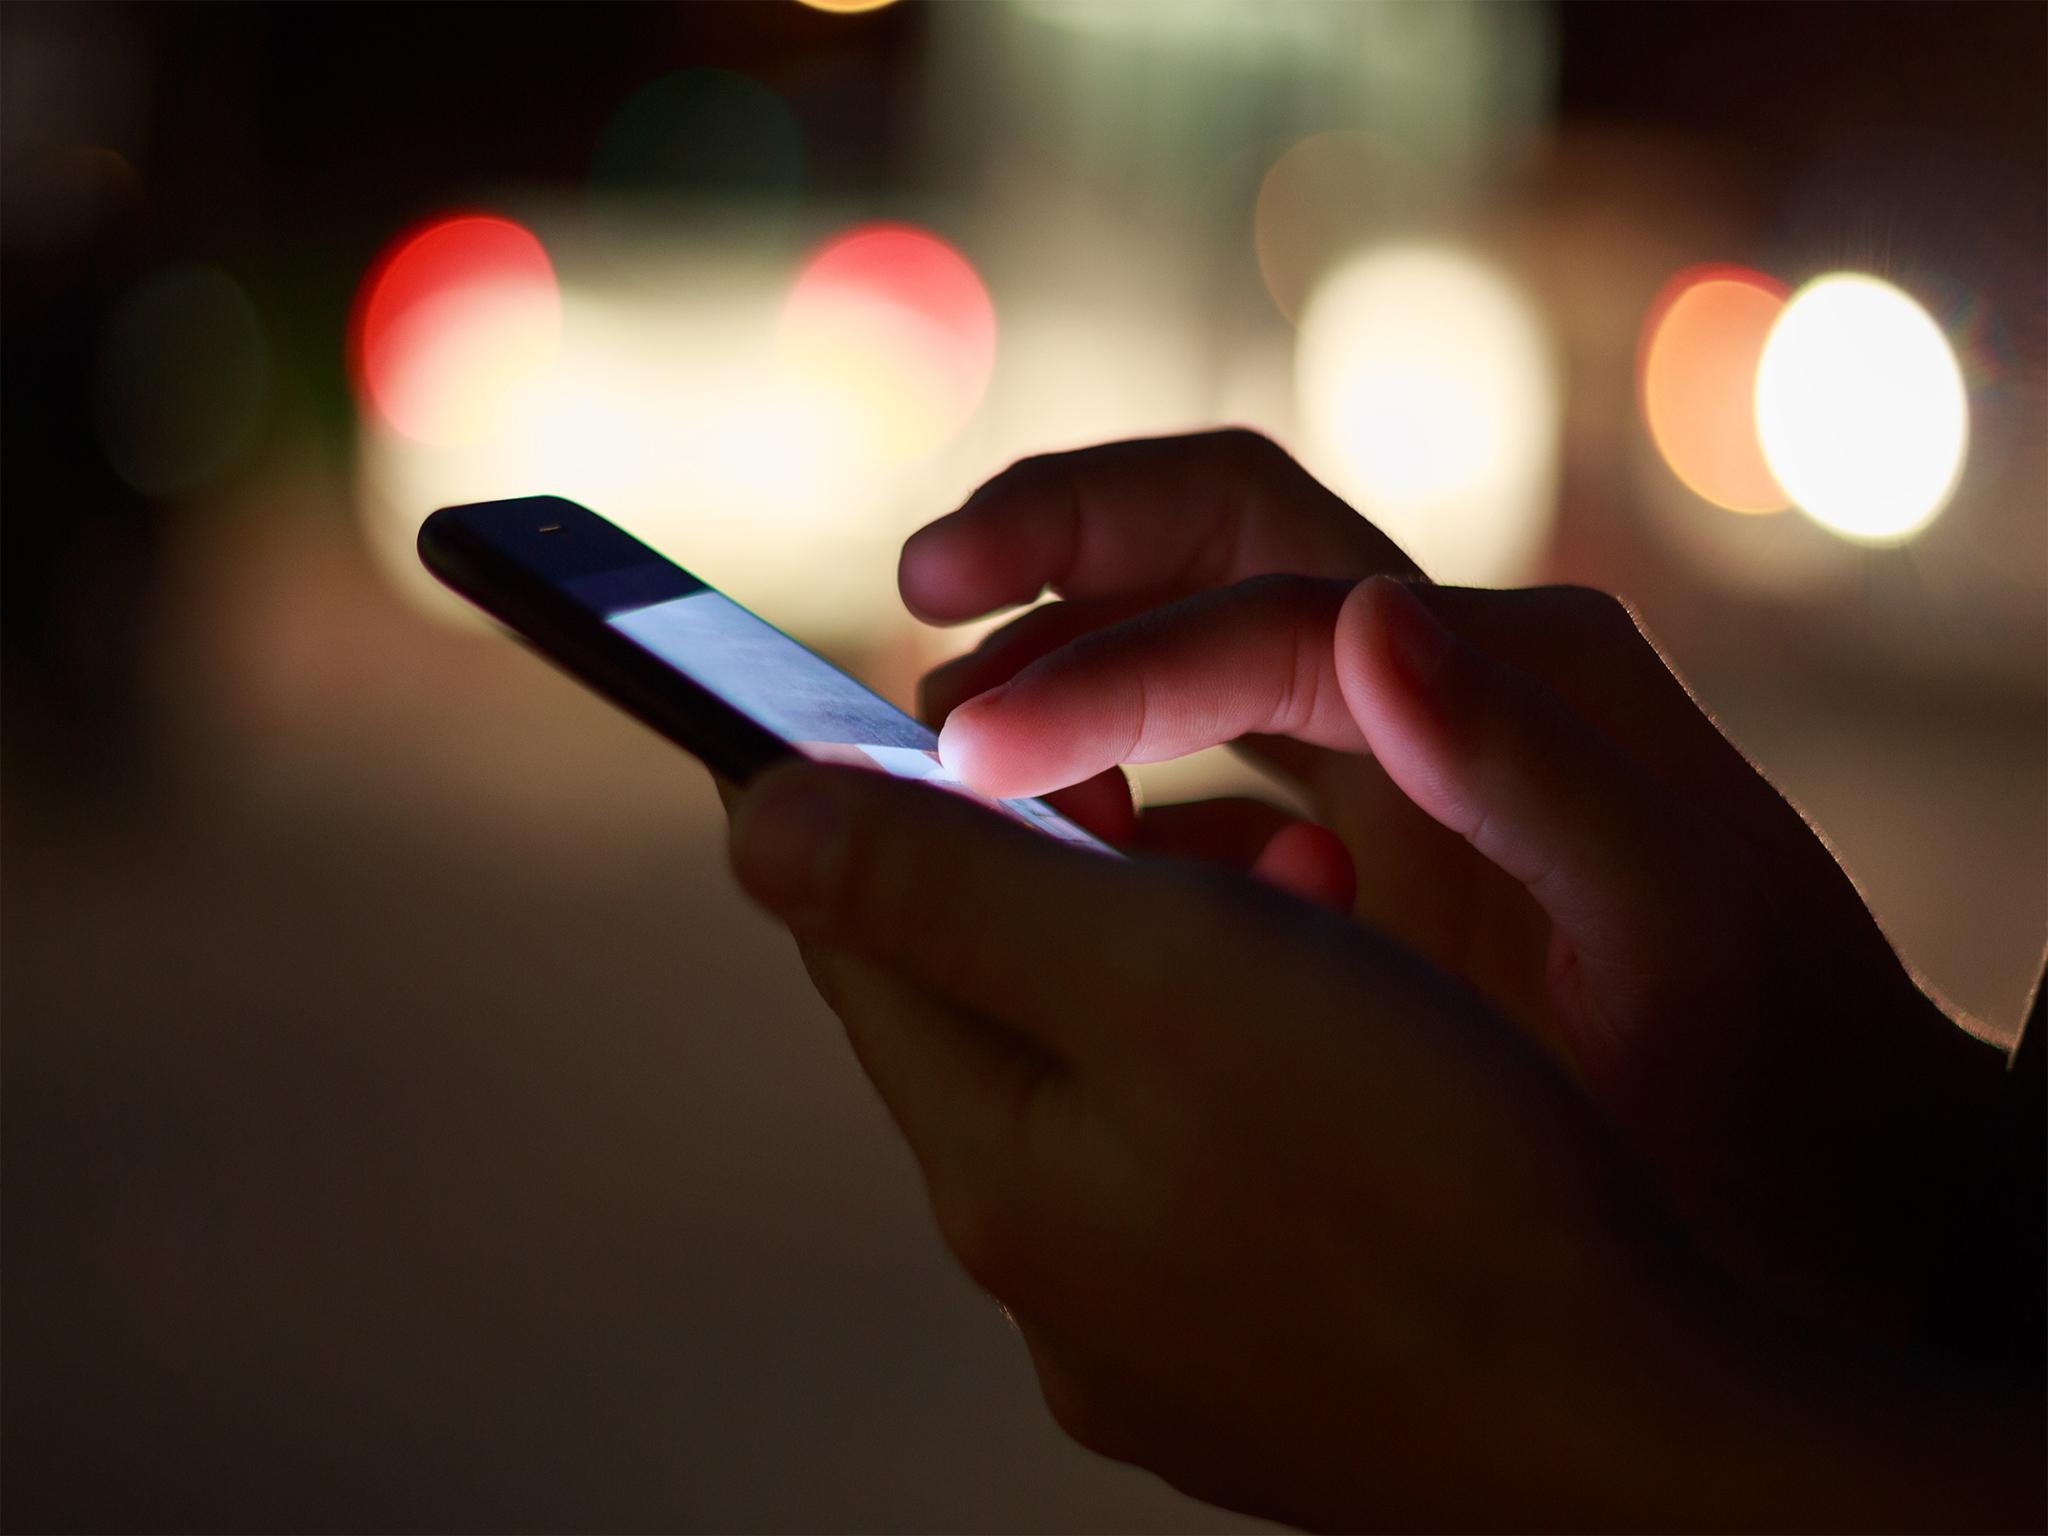 Looking at your mobile after sunfall can disrupt sleep according to research